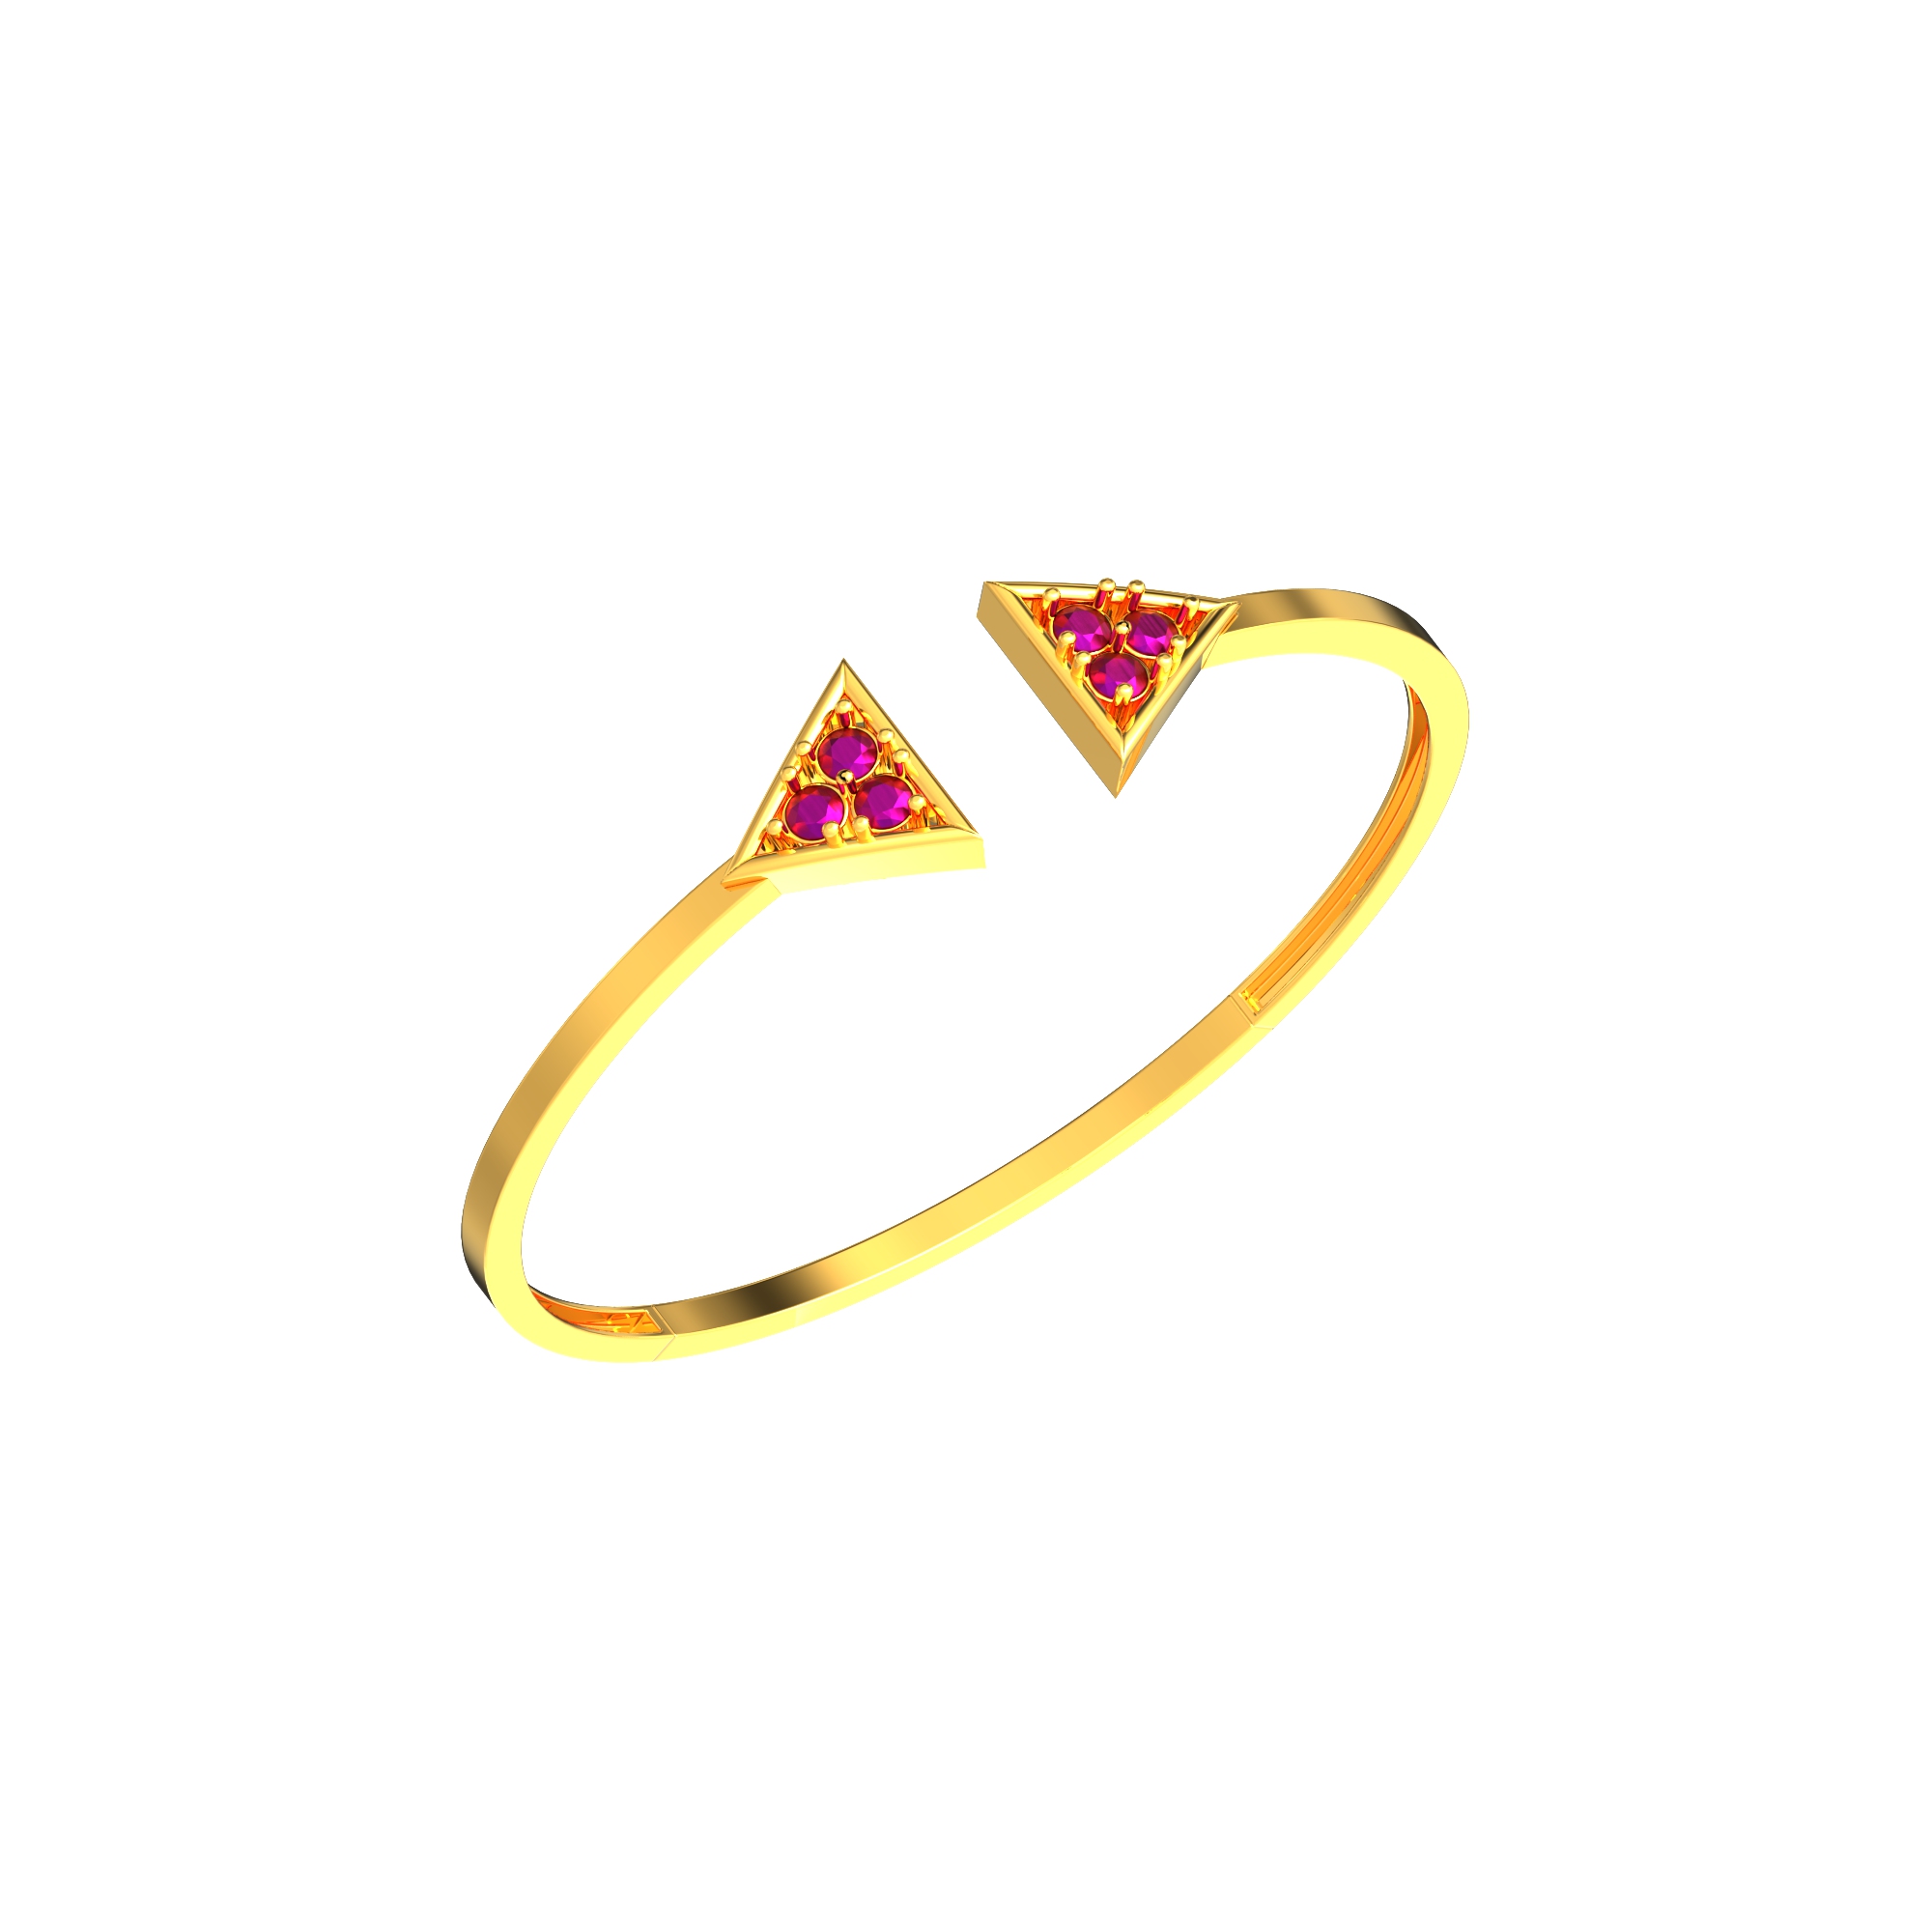 Gold Bracelet With Triangle Ends